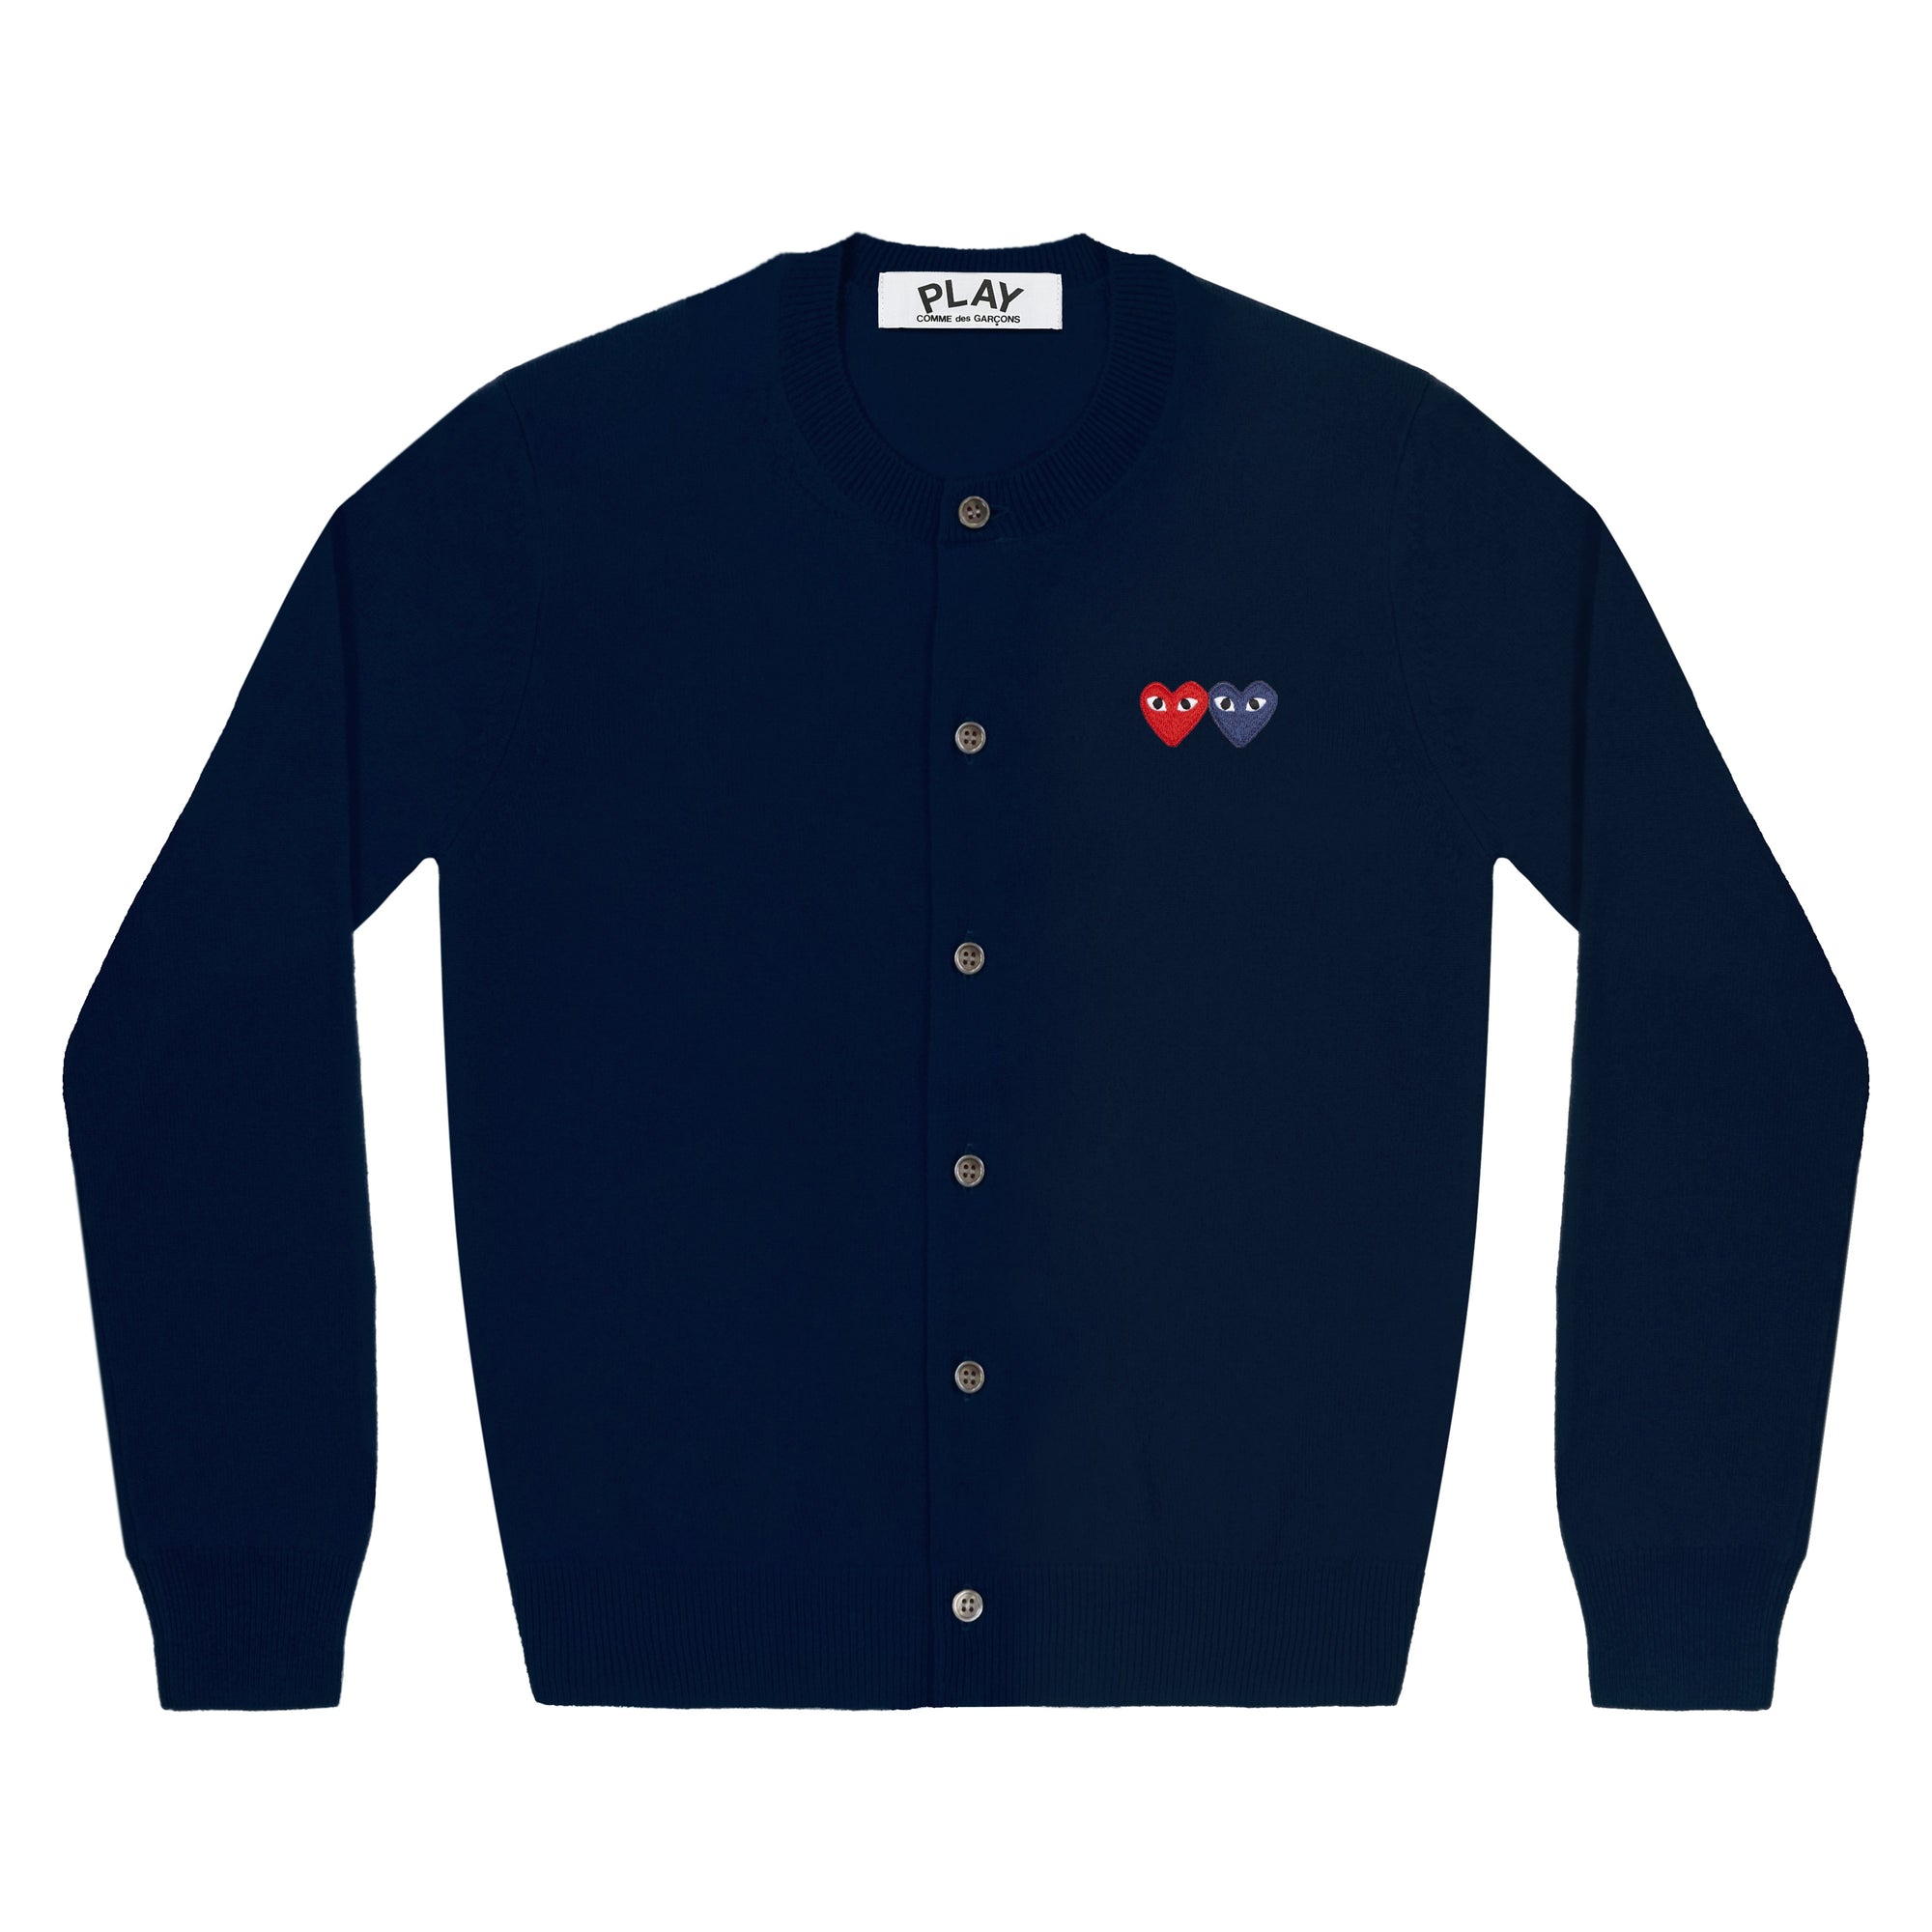 PLAY CDG - DOUBLE HEART LADIES' CARDIGAN - (NAVY) view 1